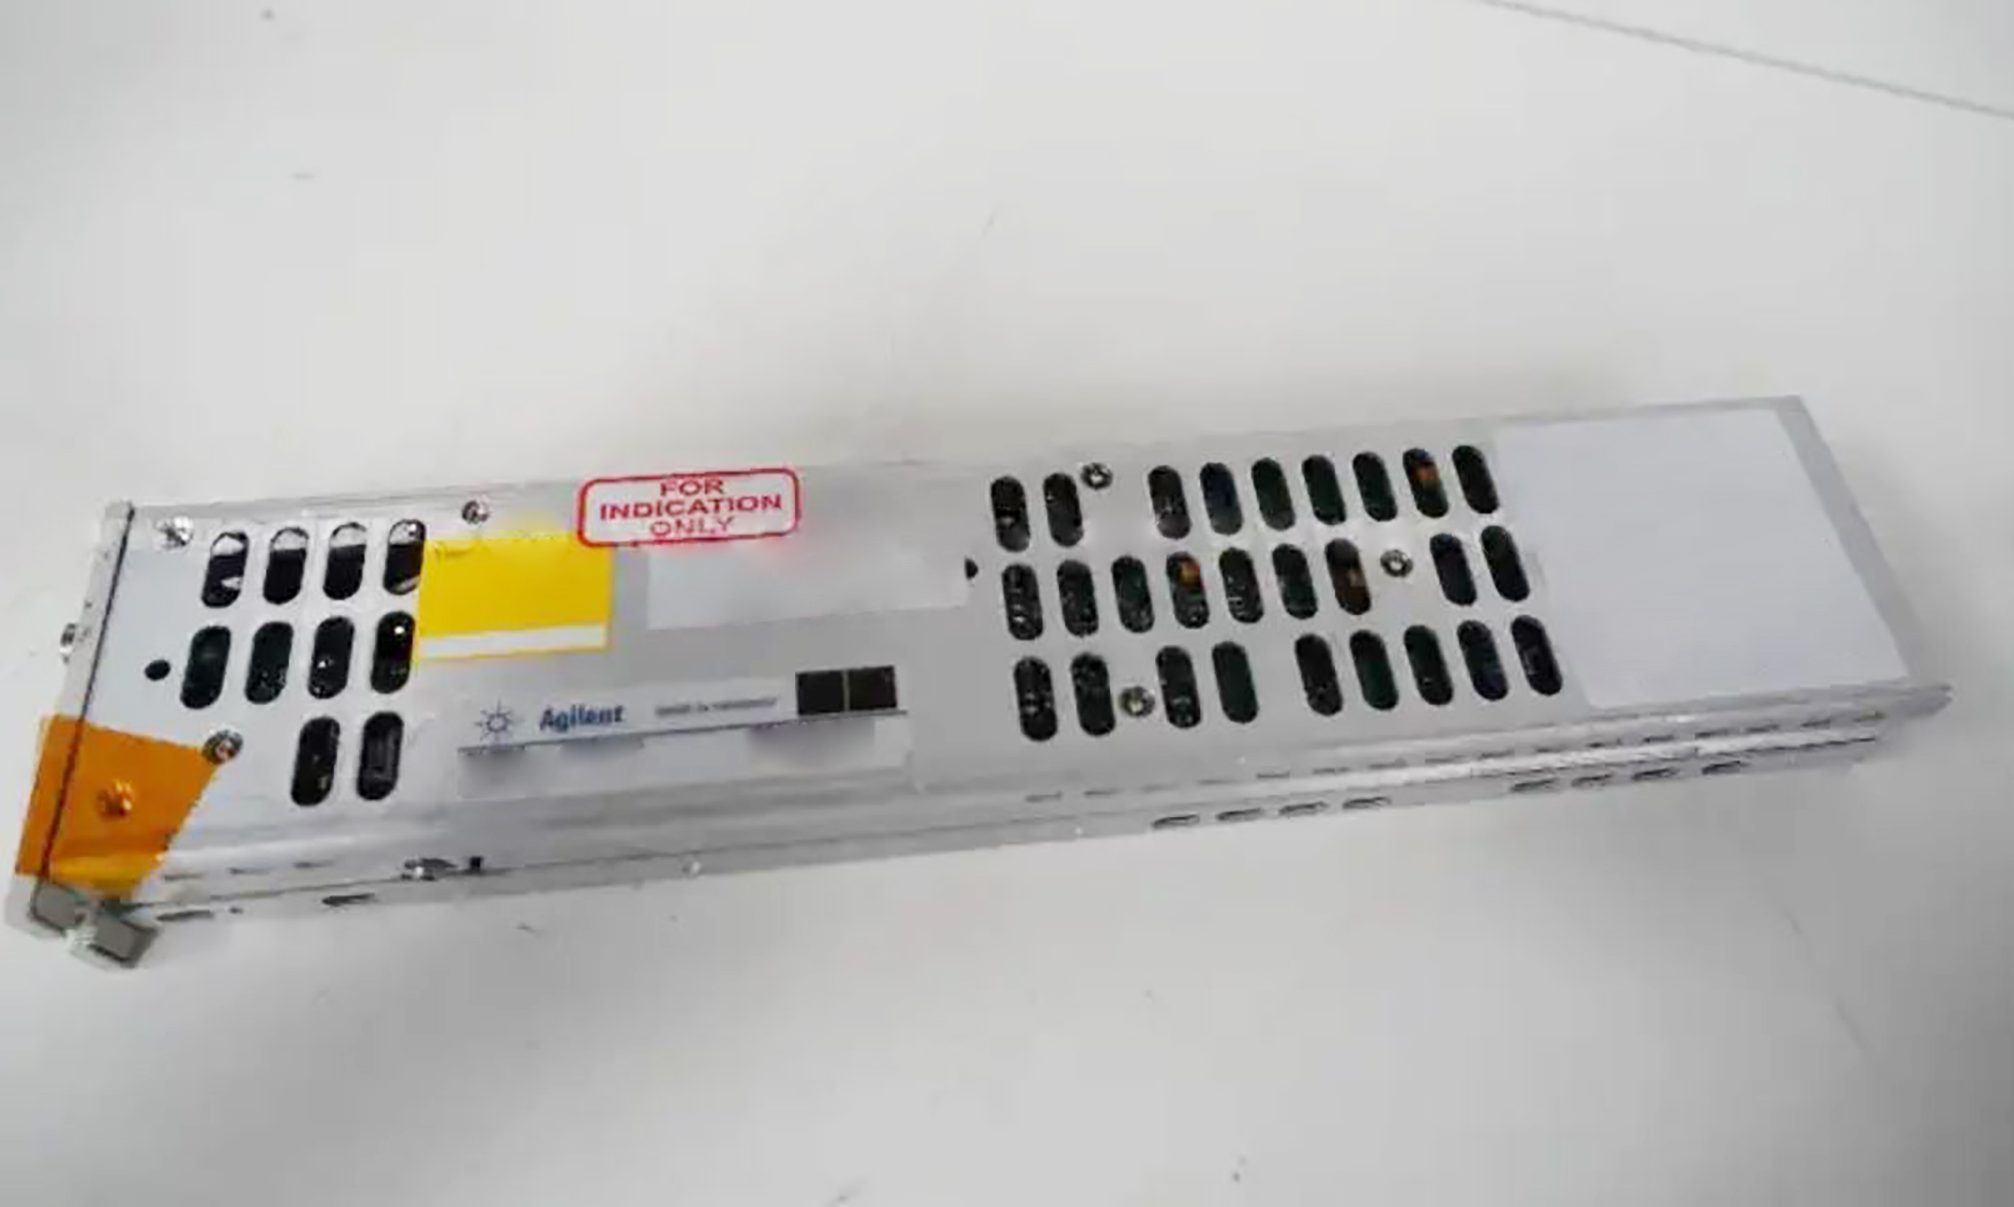 Agilent 81989 A Tunable Laser 62279 For Sale